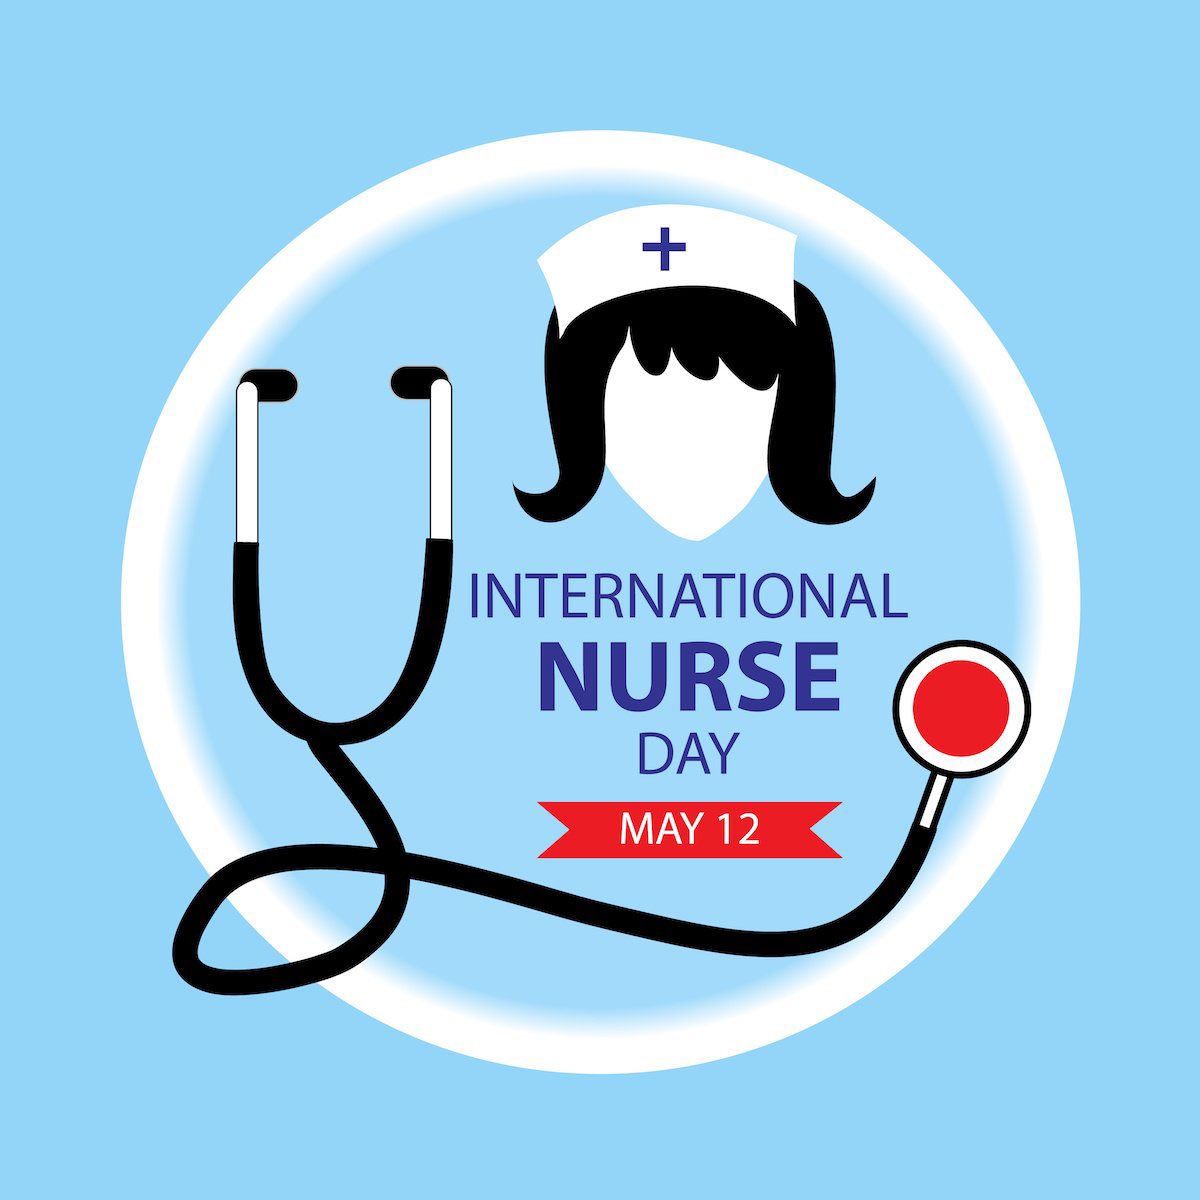 A very happy International Nurses Day to all you nurses out there, who do an amazing job, day in and day out. 😘